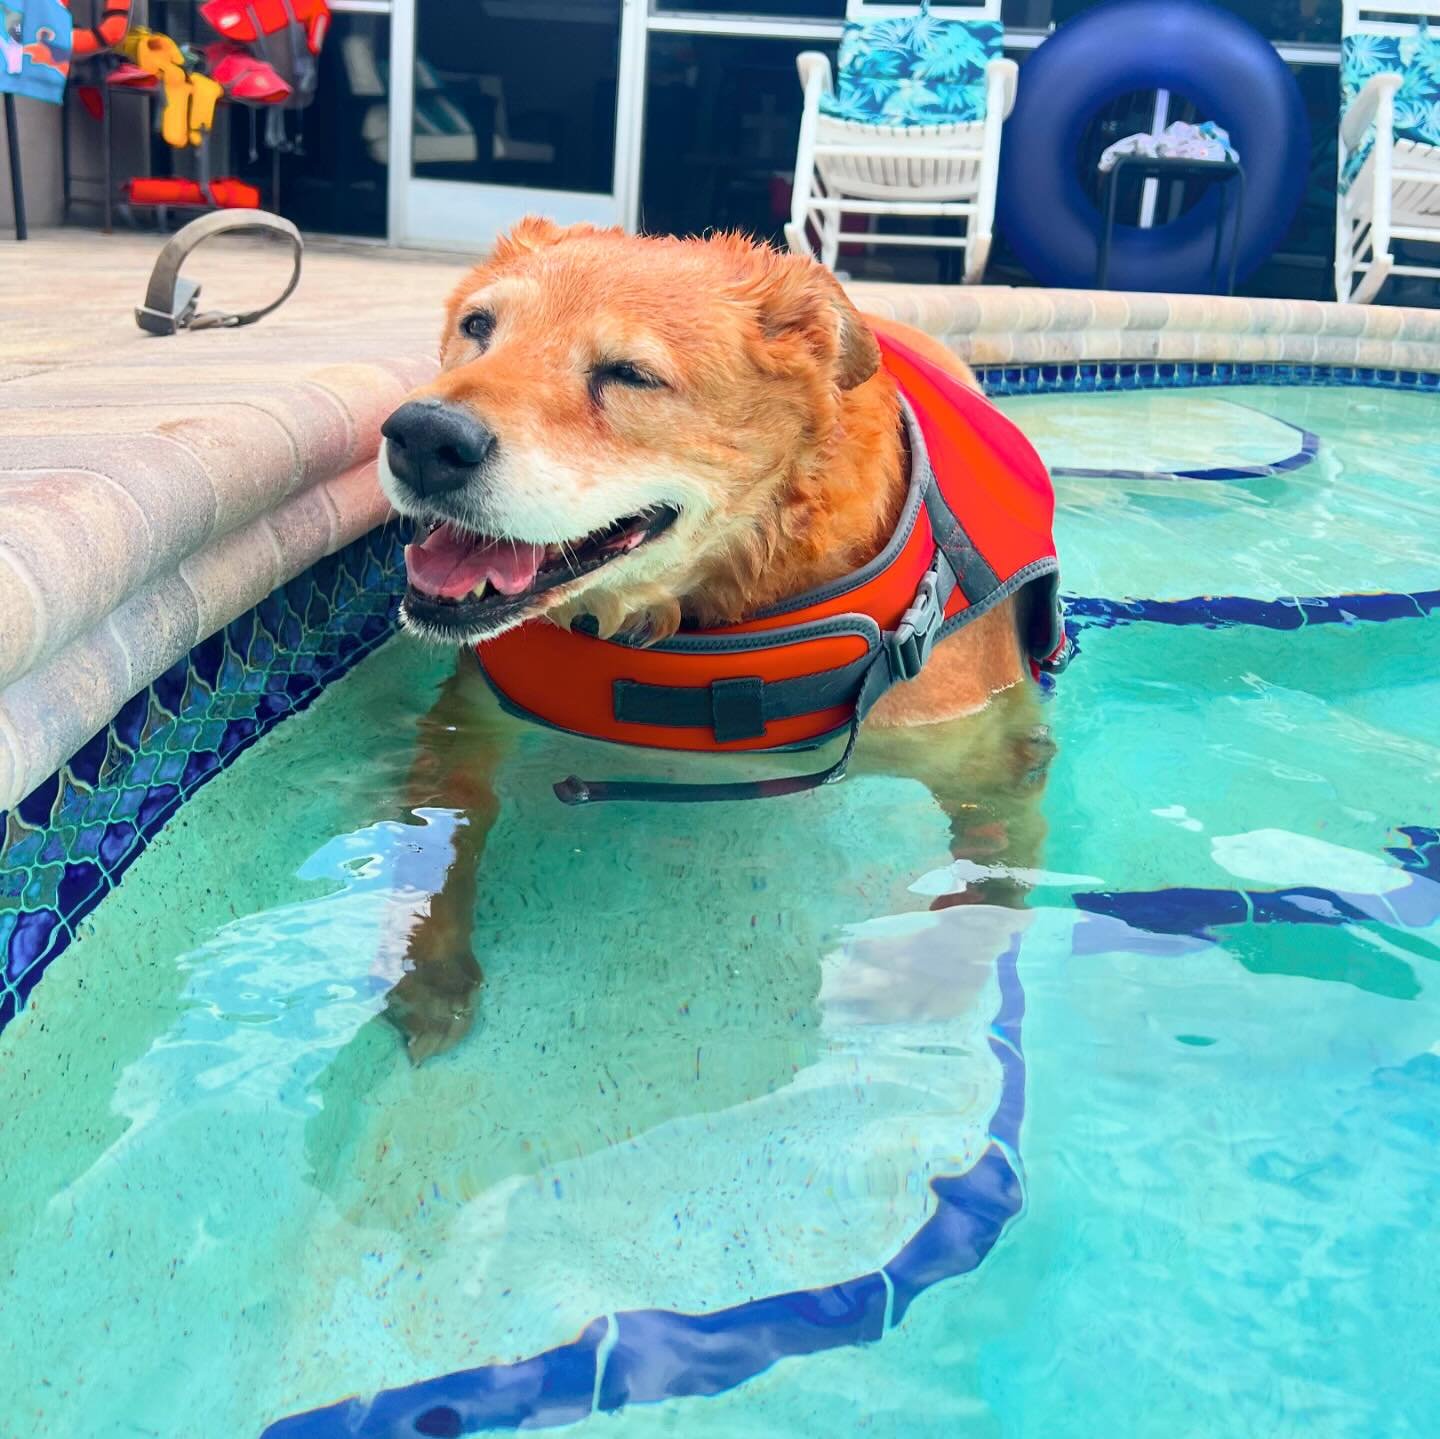 Welcome Oakley🍀she started her Lucky Dog swims with us to help her lose weight and regain her mobility. Oakley was diagnosed with severe hypothyroidism &amp; is severely overweight. She can barely walk &amp; is in constant pain. We are looking forwa